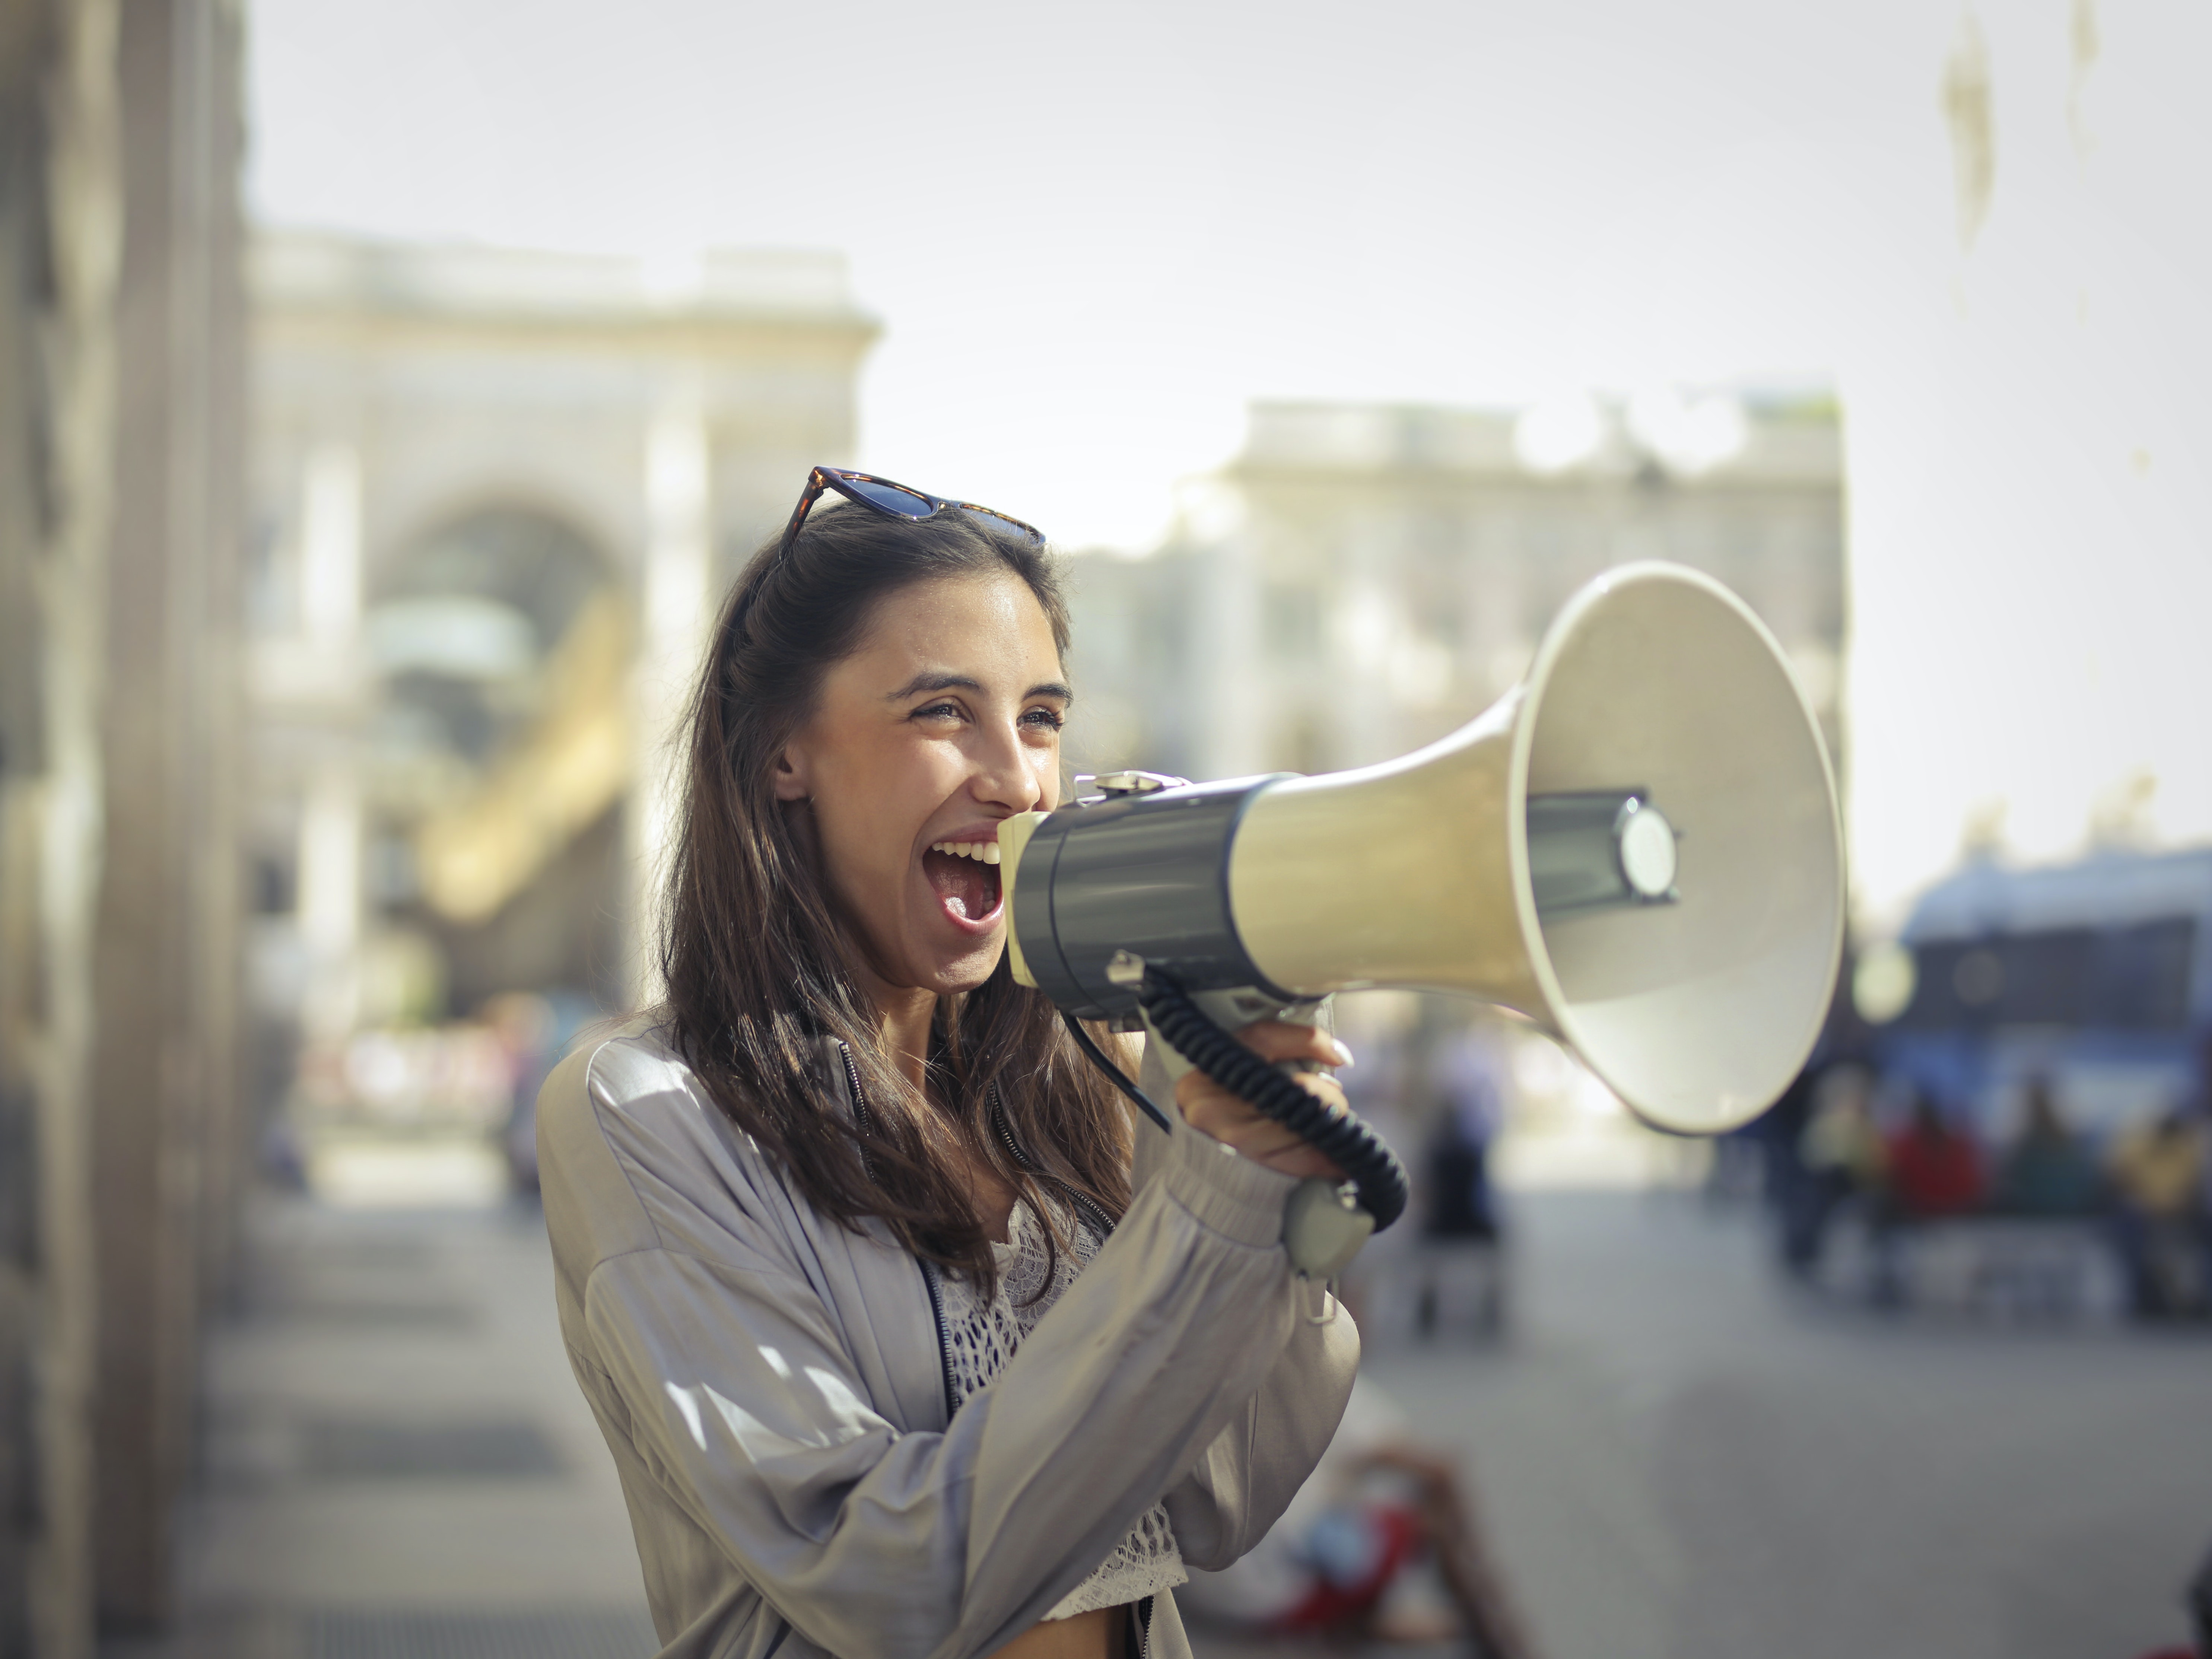 Image of a young latin woman in the street with a megaphone in her hand and she is yelling into it with a big smile on her face.